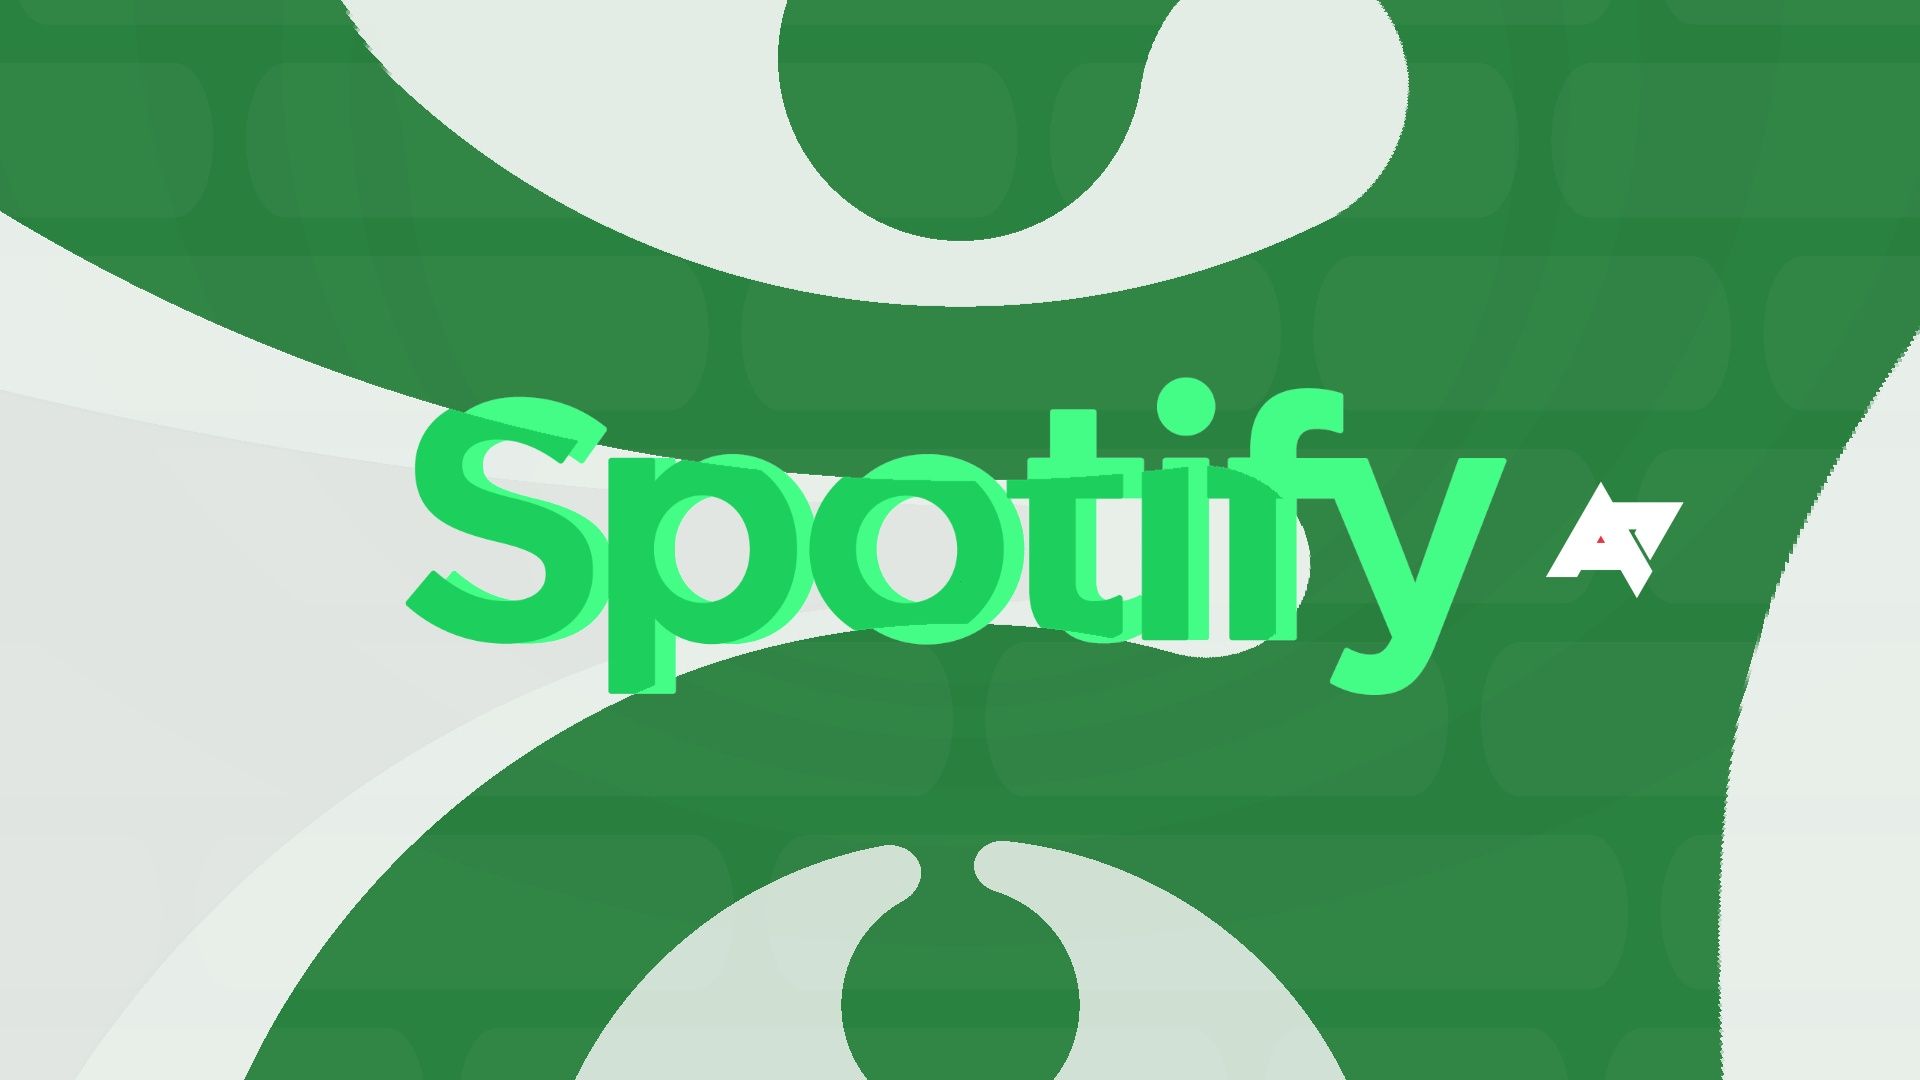 The Spotify logo against a green and white background